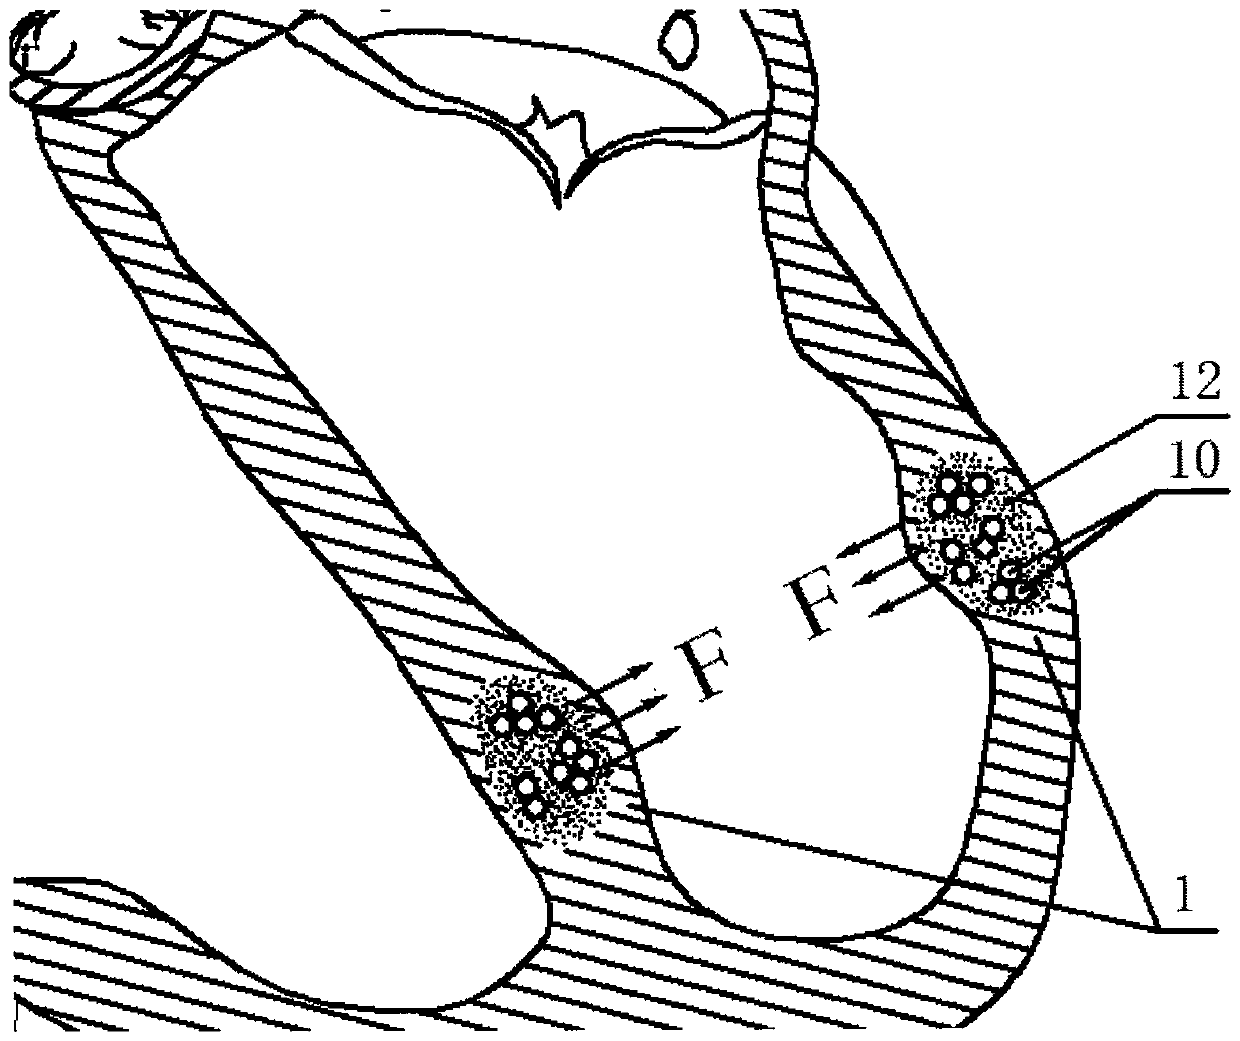 Ventricle assisting device capable of enhancing cardiac functions